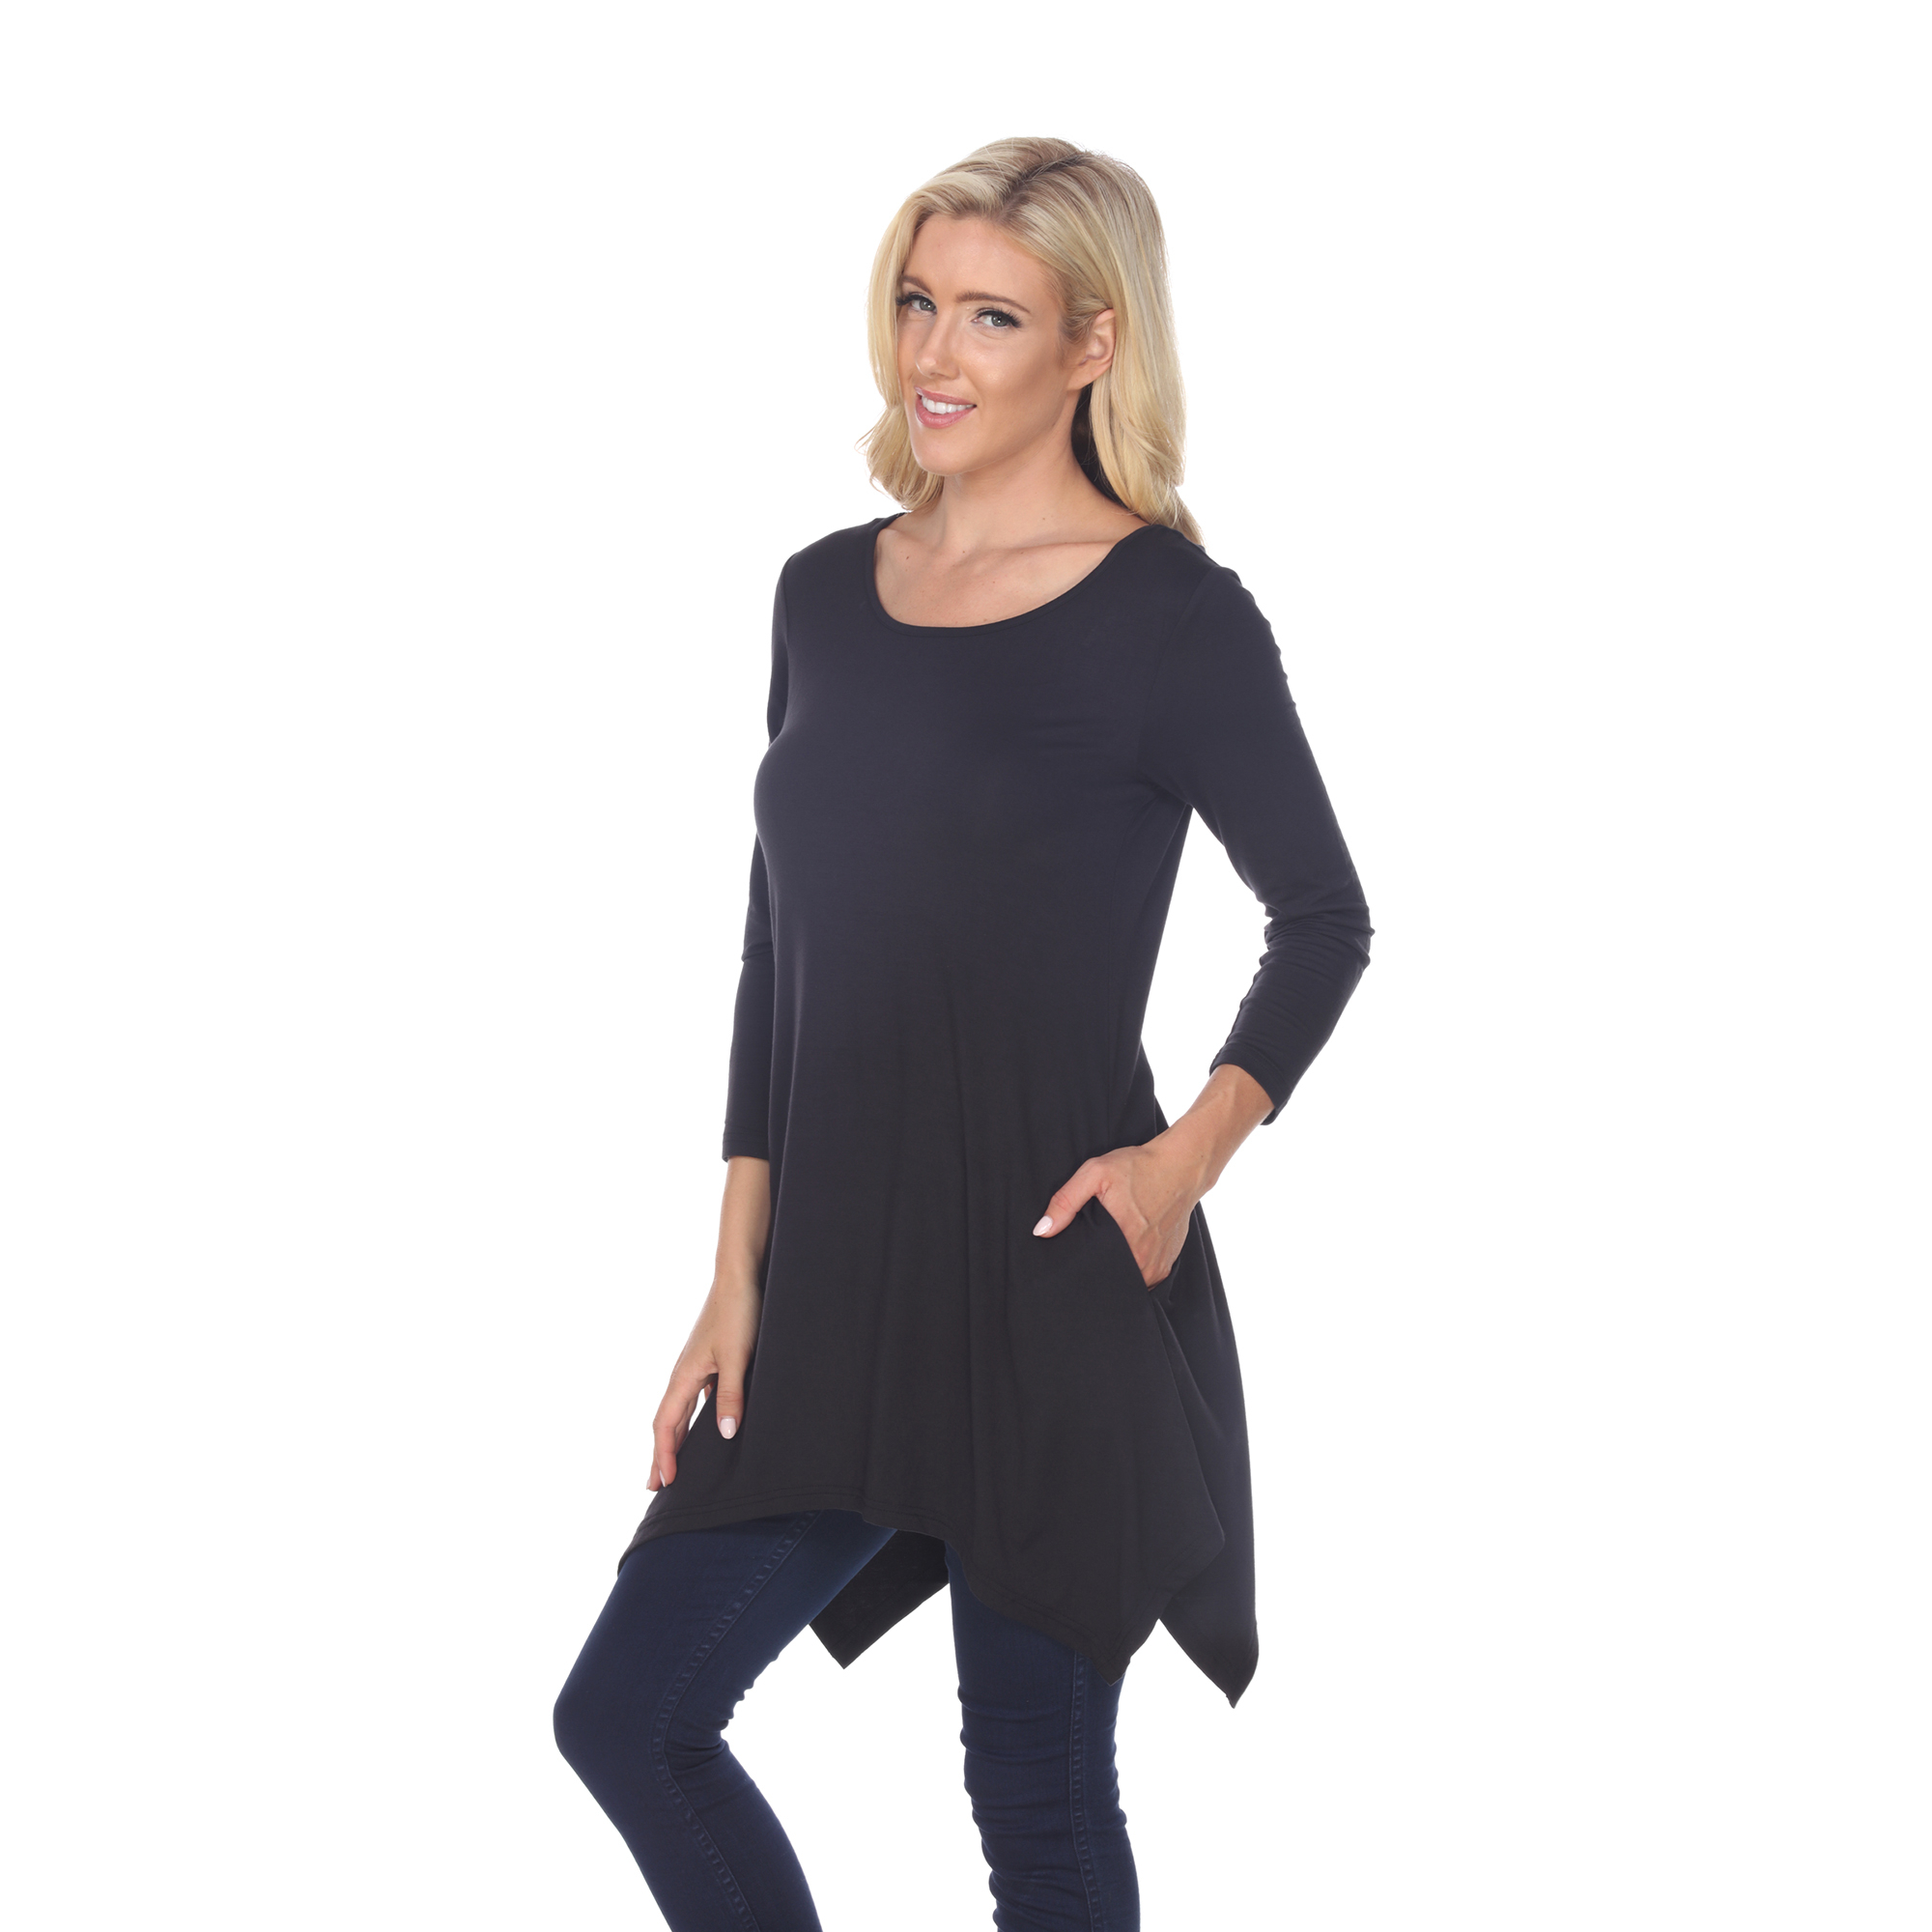 White Mark Women's Quarter Sleeve Tunic Top With Pockets - Black, Large